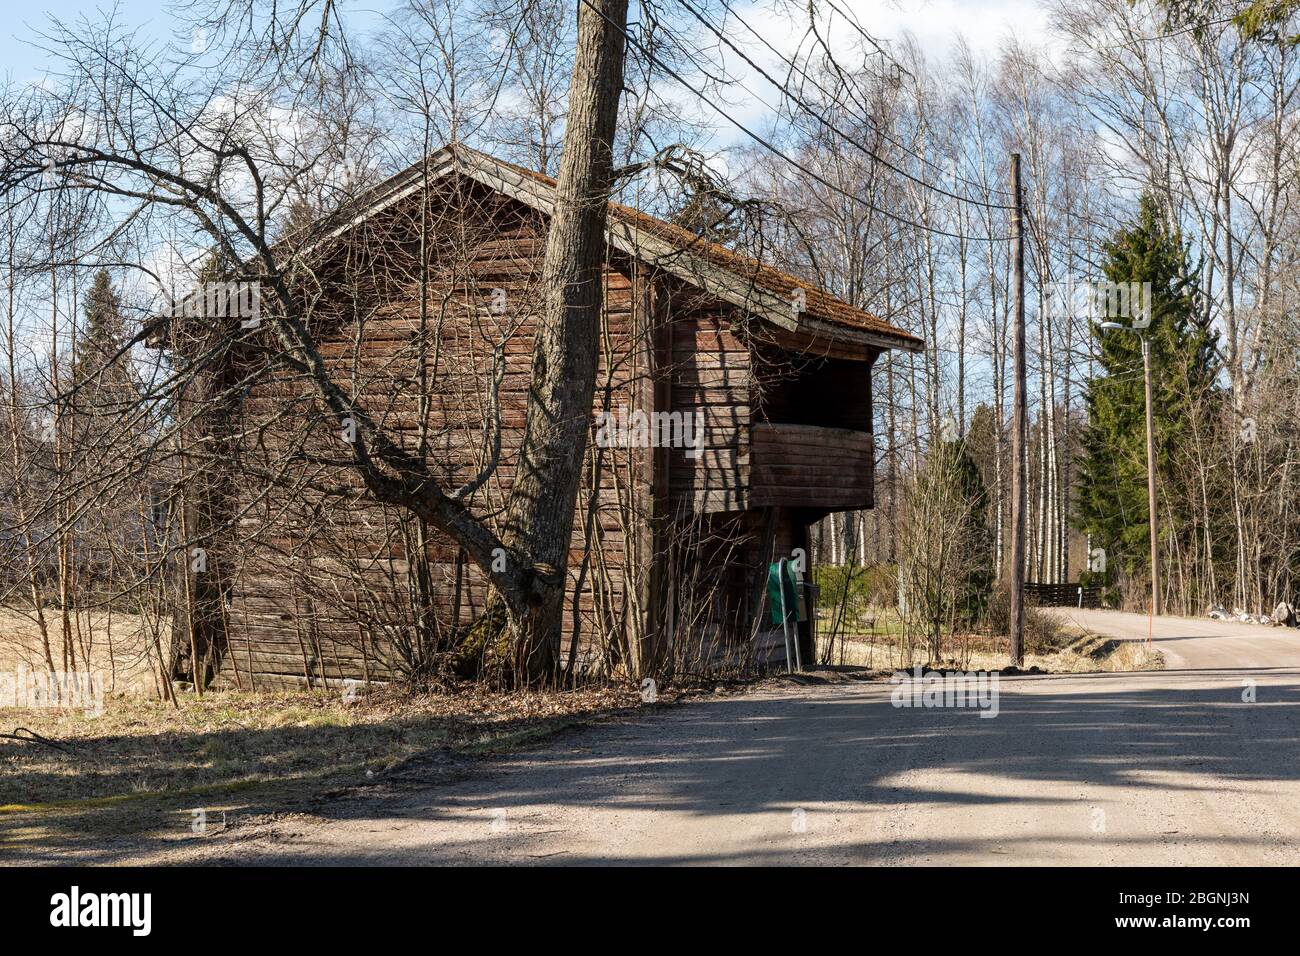 Old wooden loft building by rural country road in Tuusula, Finland Stock Photo